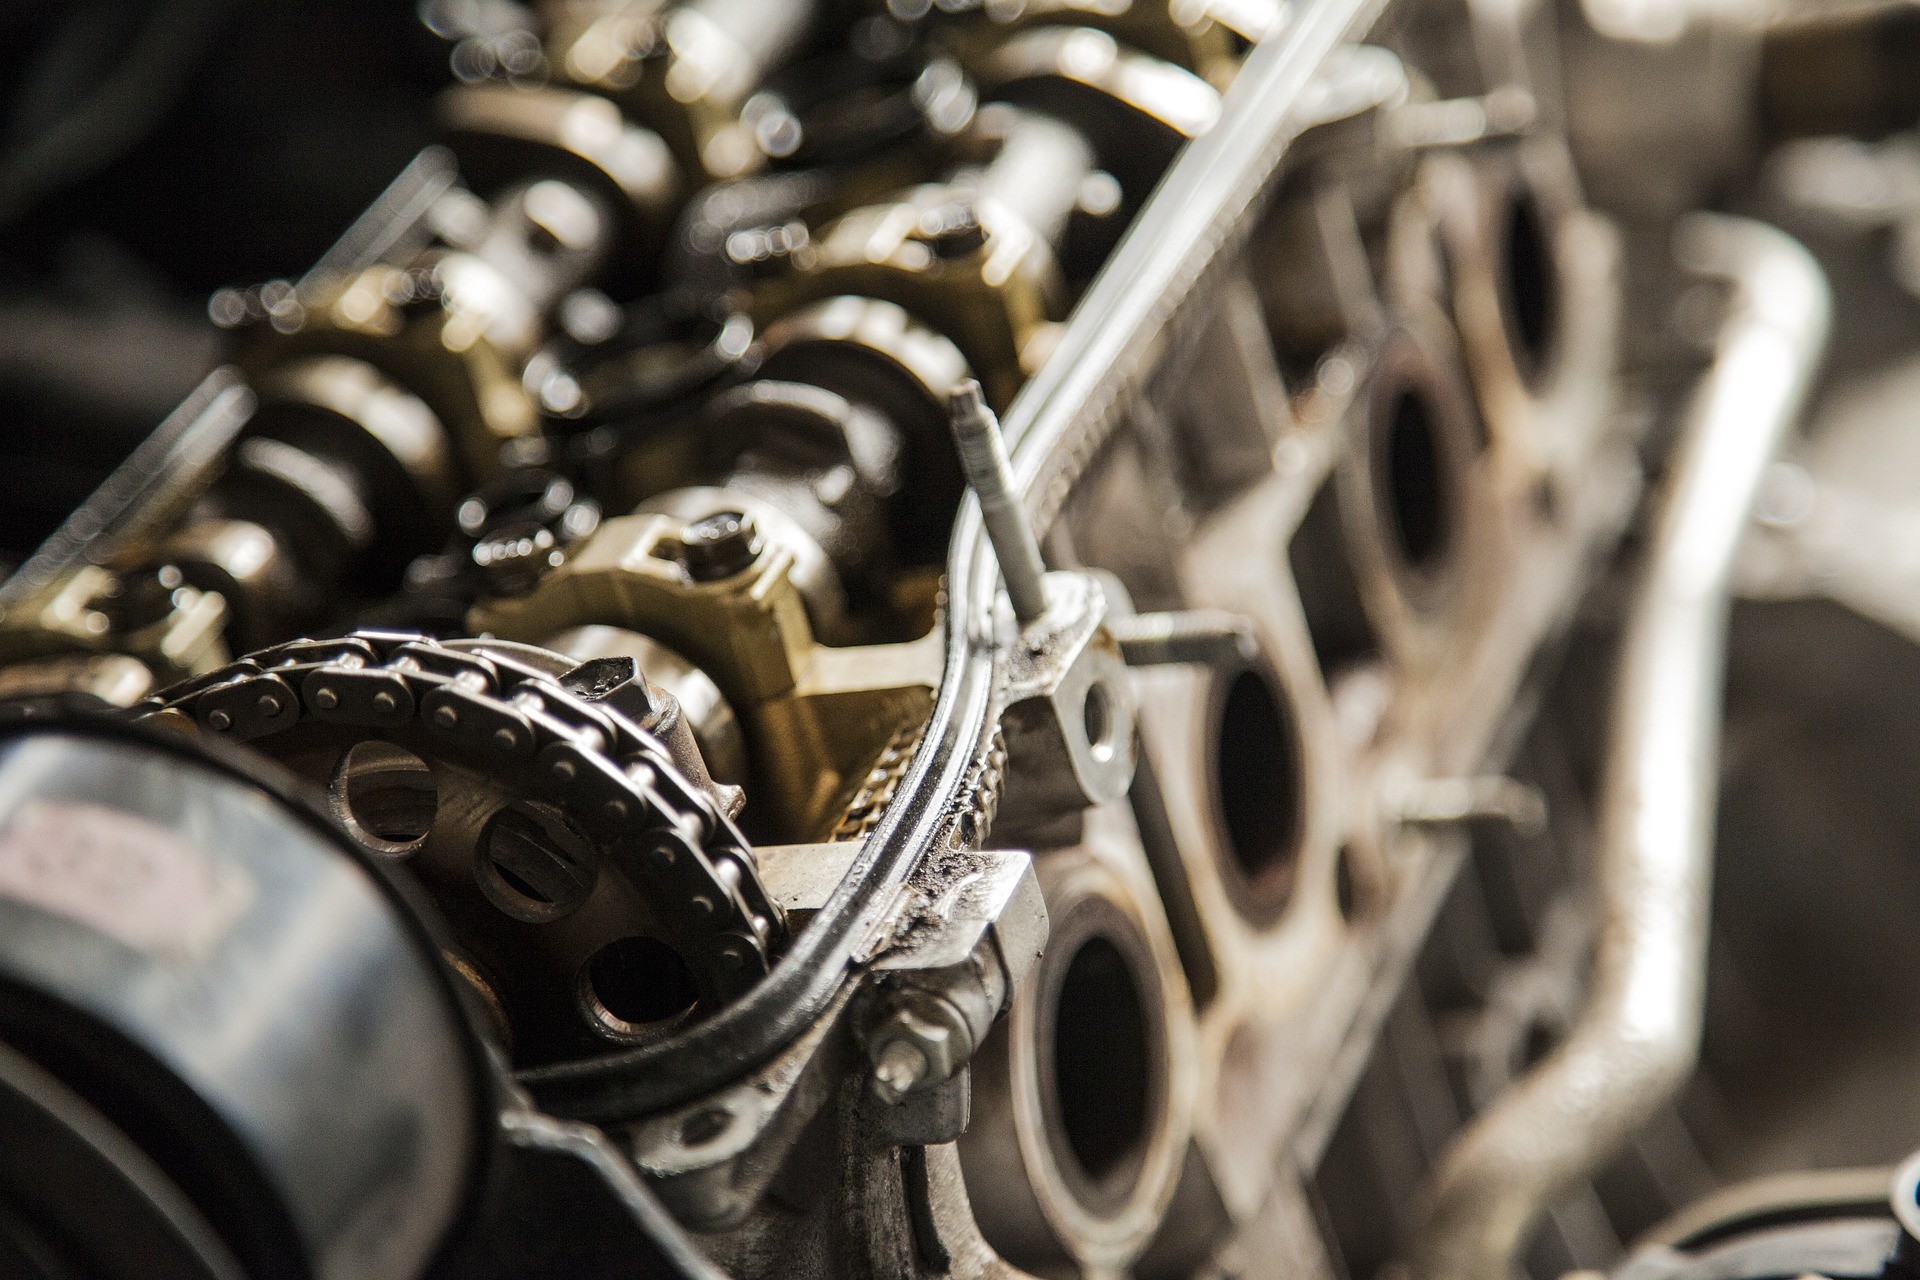 TYPES OF CAR ENGINES & ALL YOU NEED TO KNOW ABOUT THEM